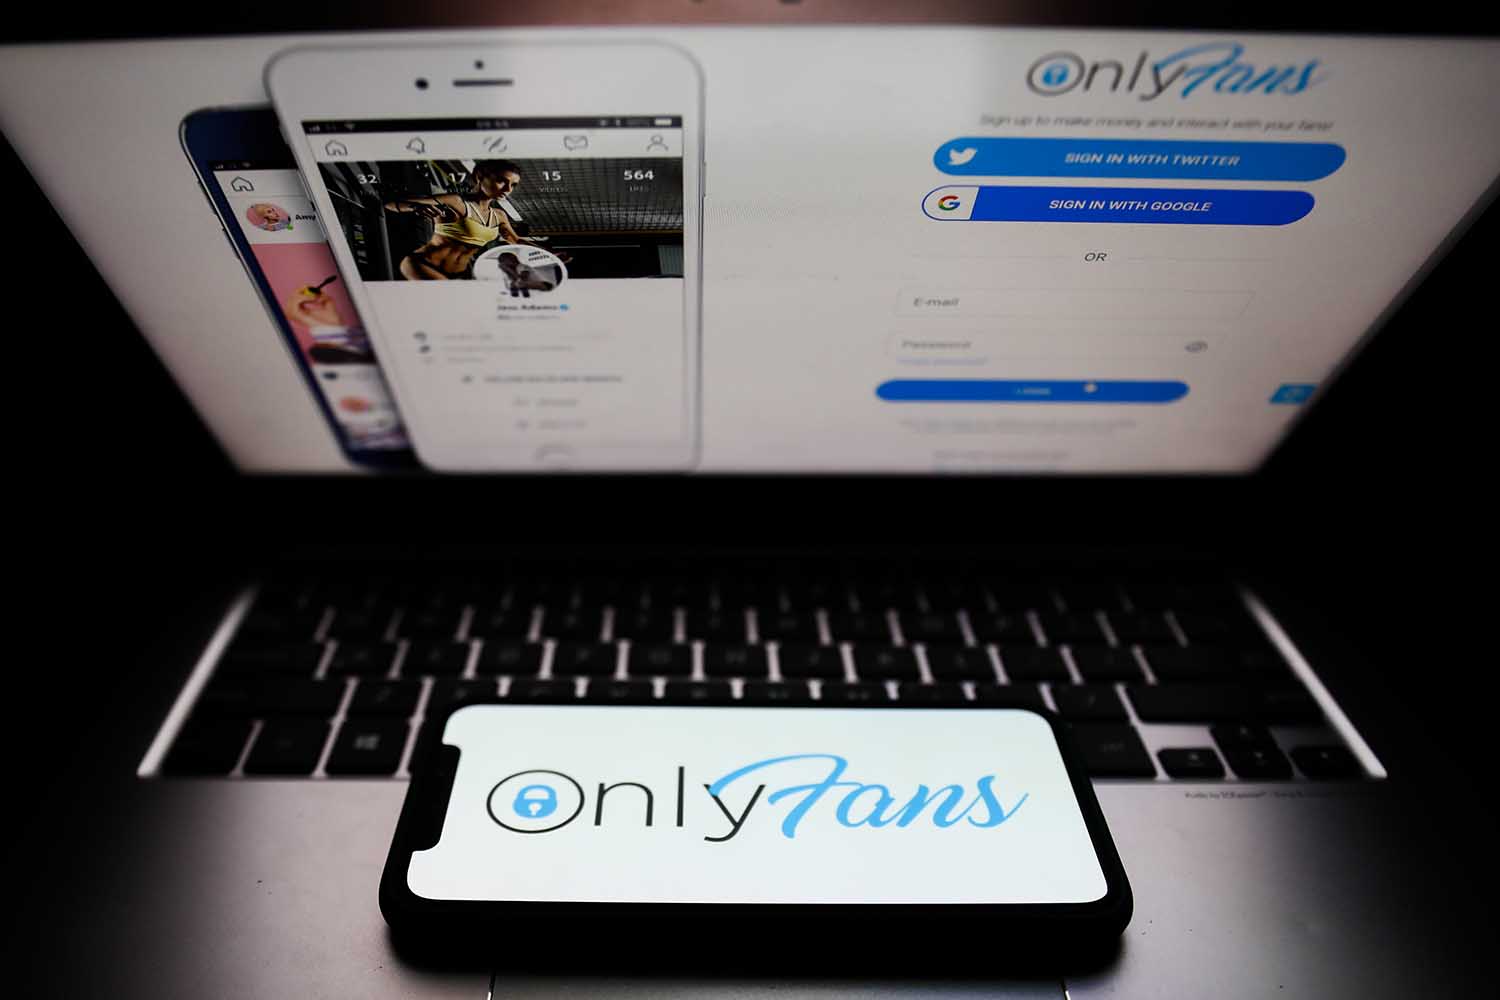 OnlyFans Is Banning the Sexually Explicit Content That Made It a Billion-Dollar Company